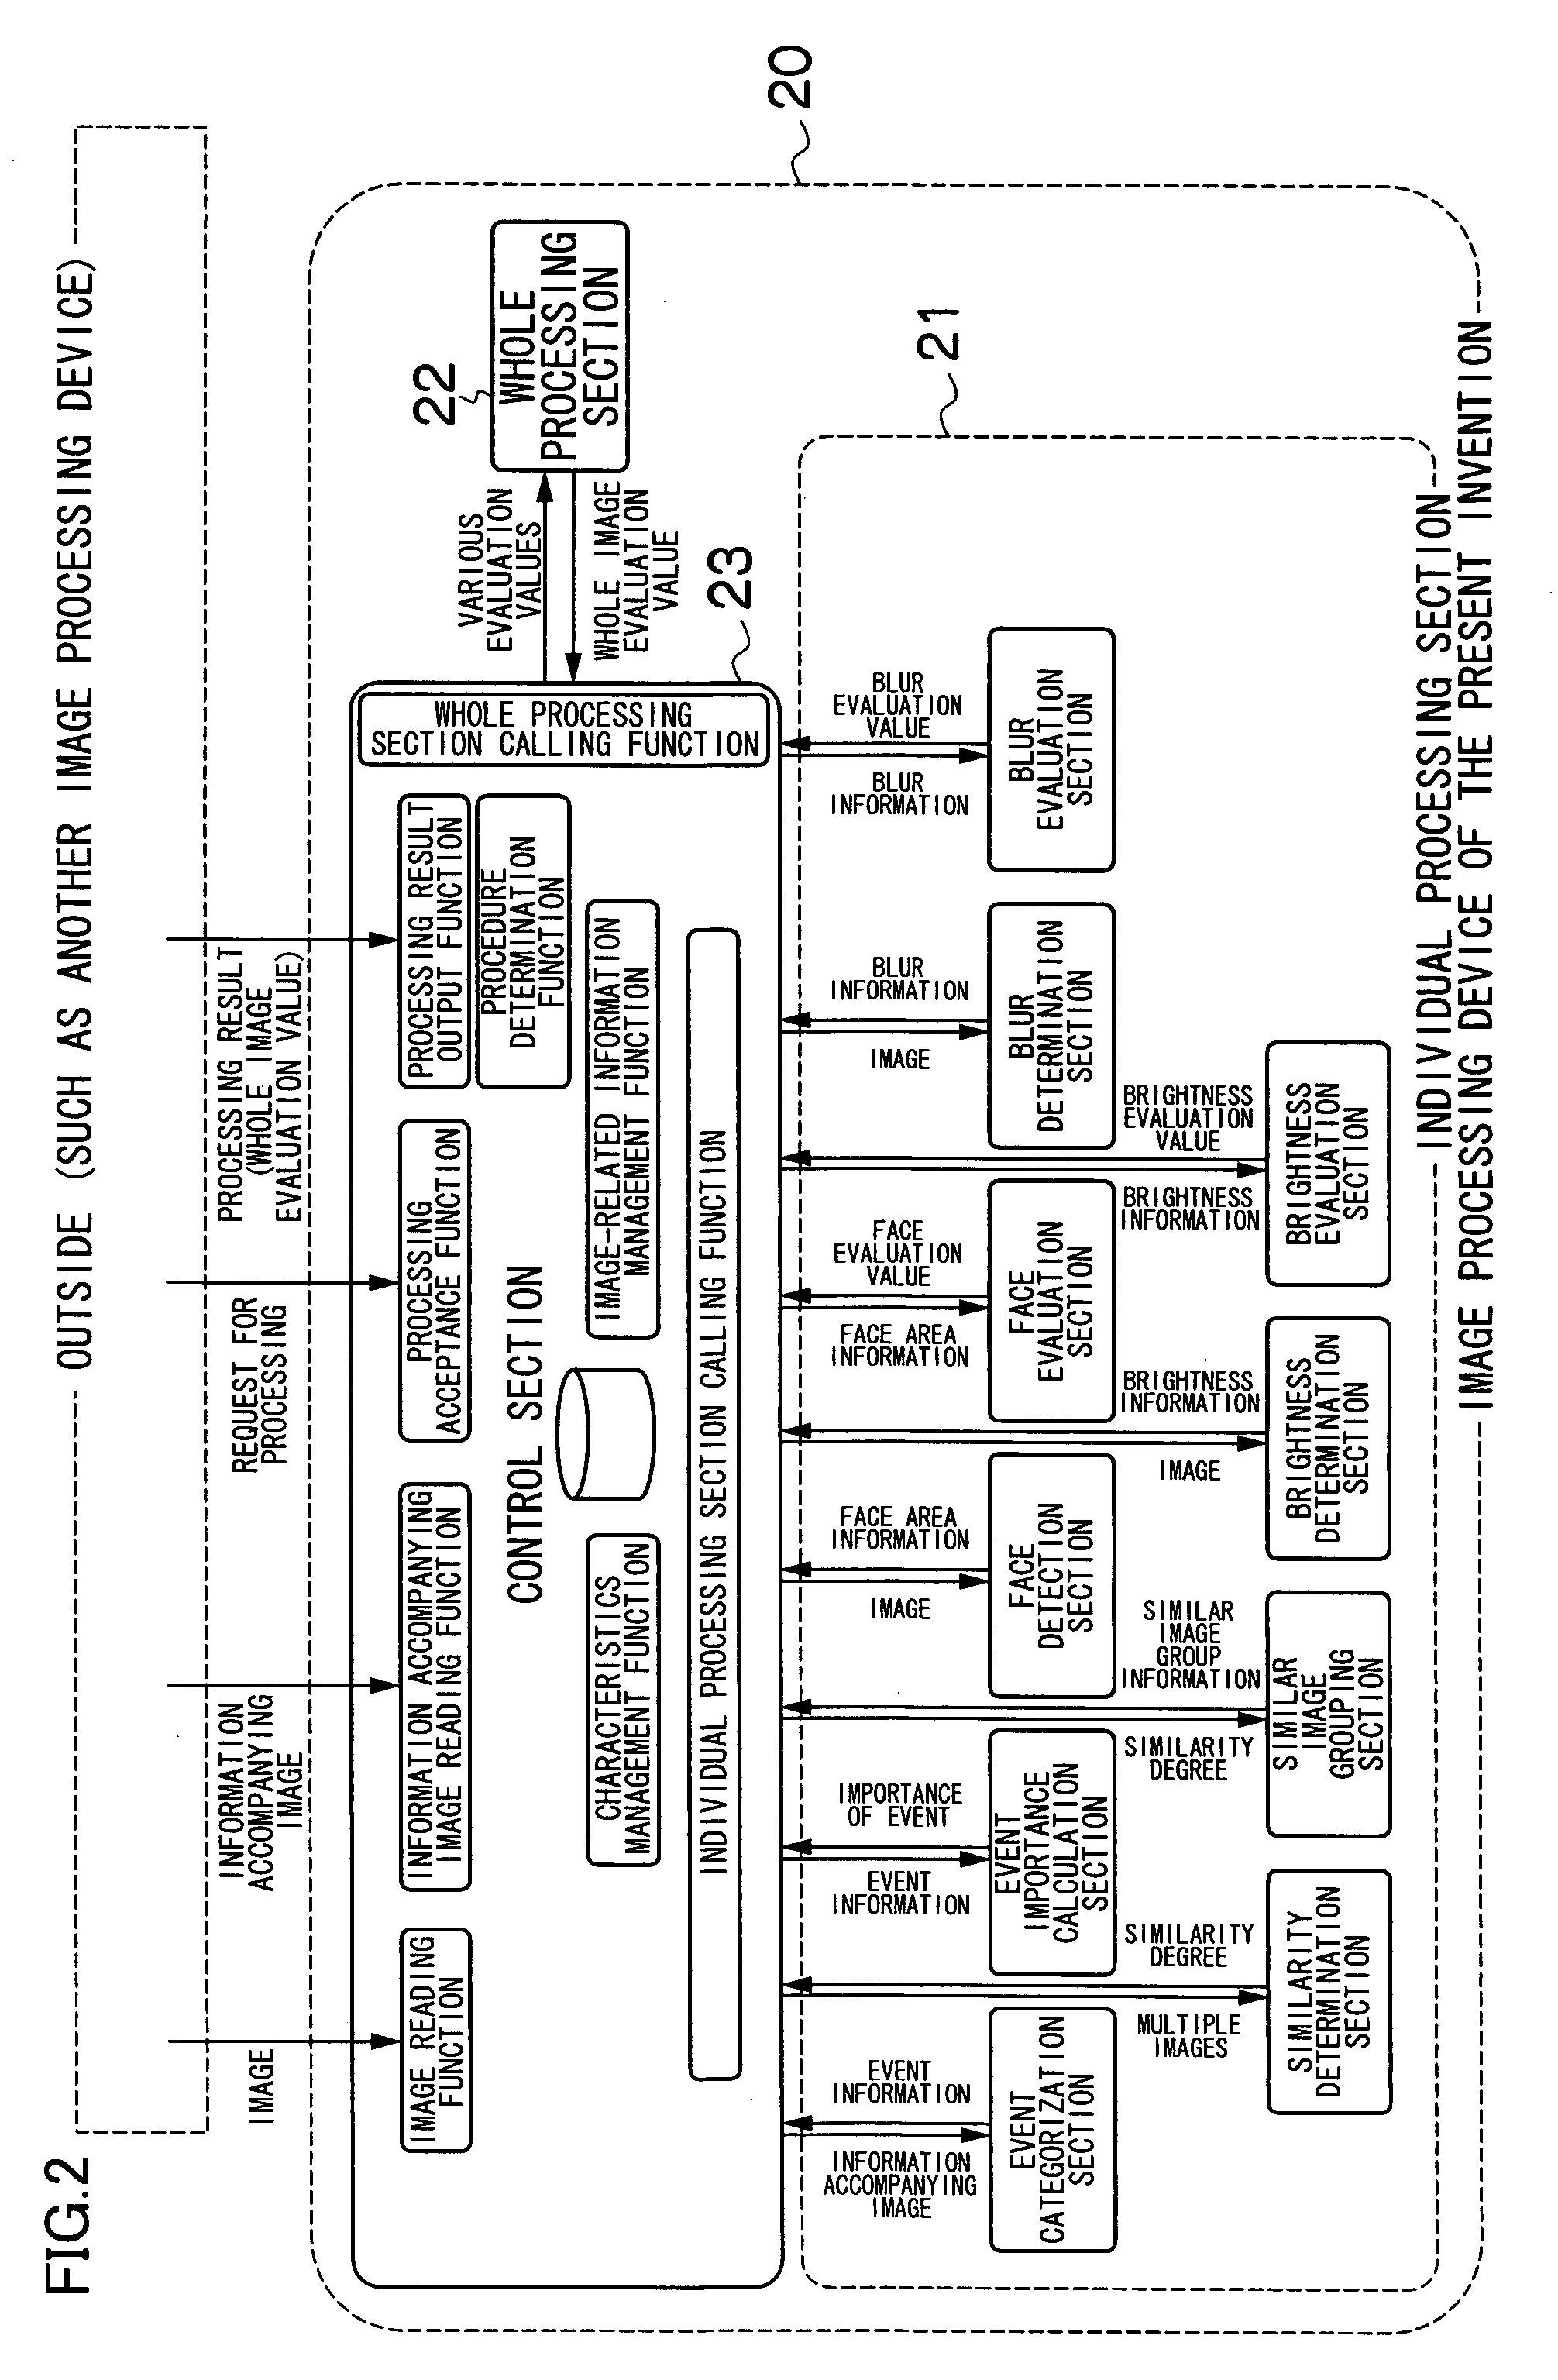 Method, program and apparatus for generating scenario for music-and-image-synchronized motion picture